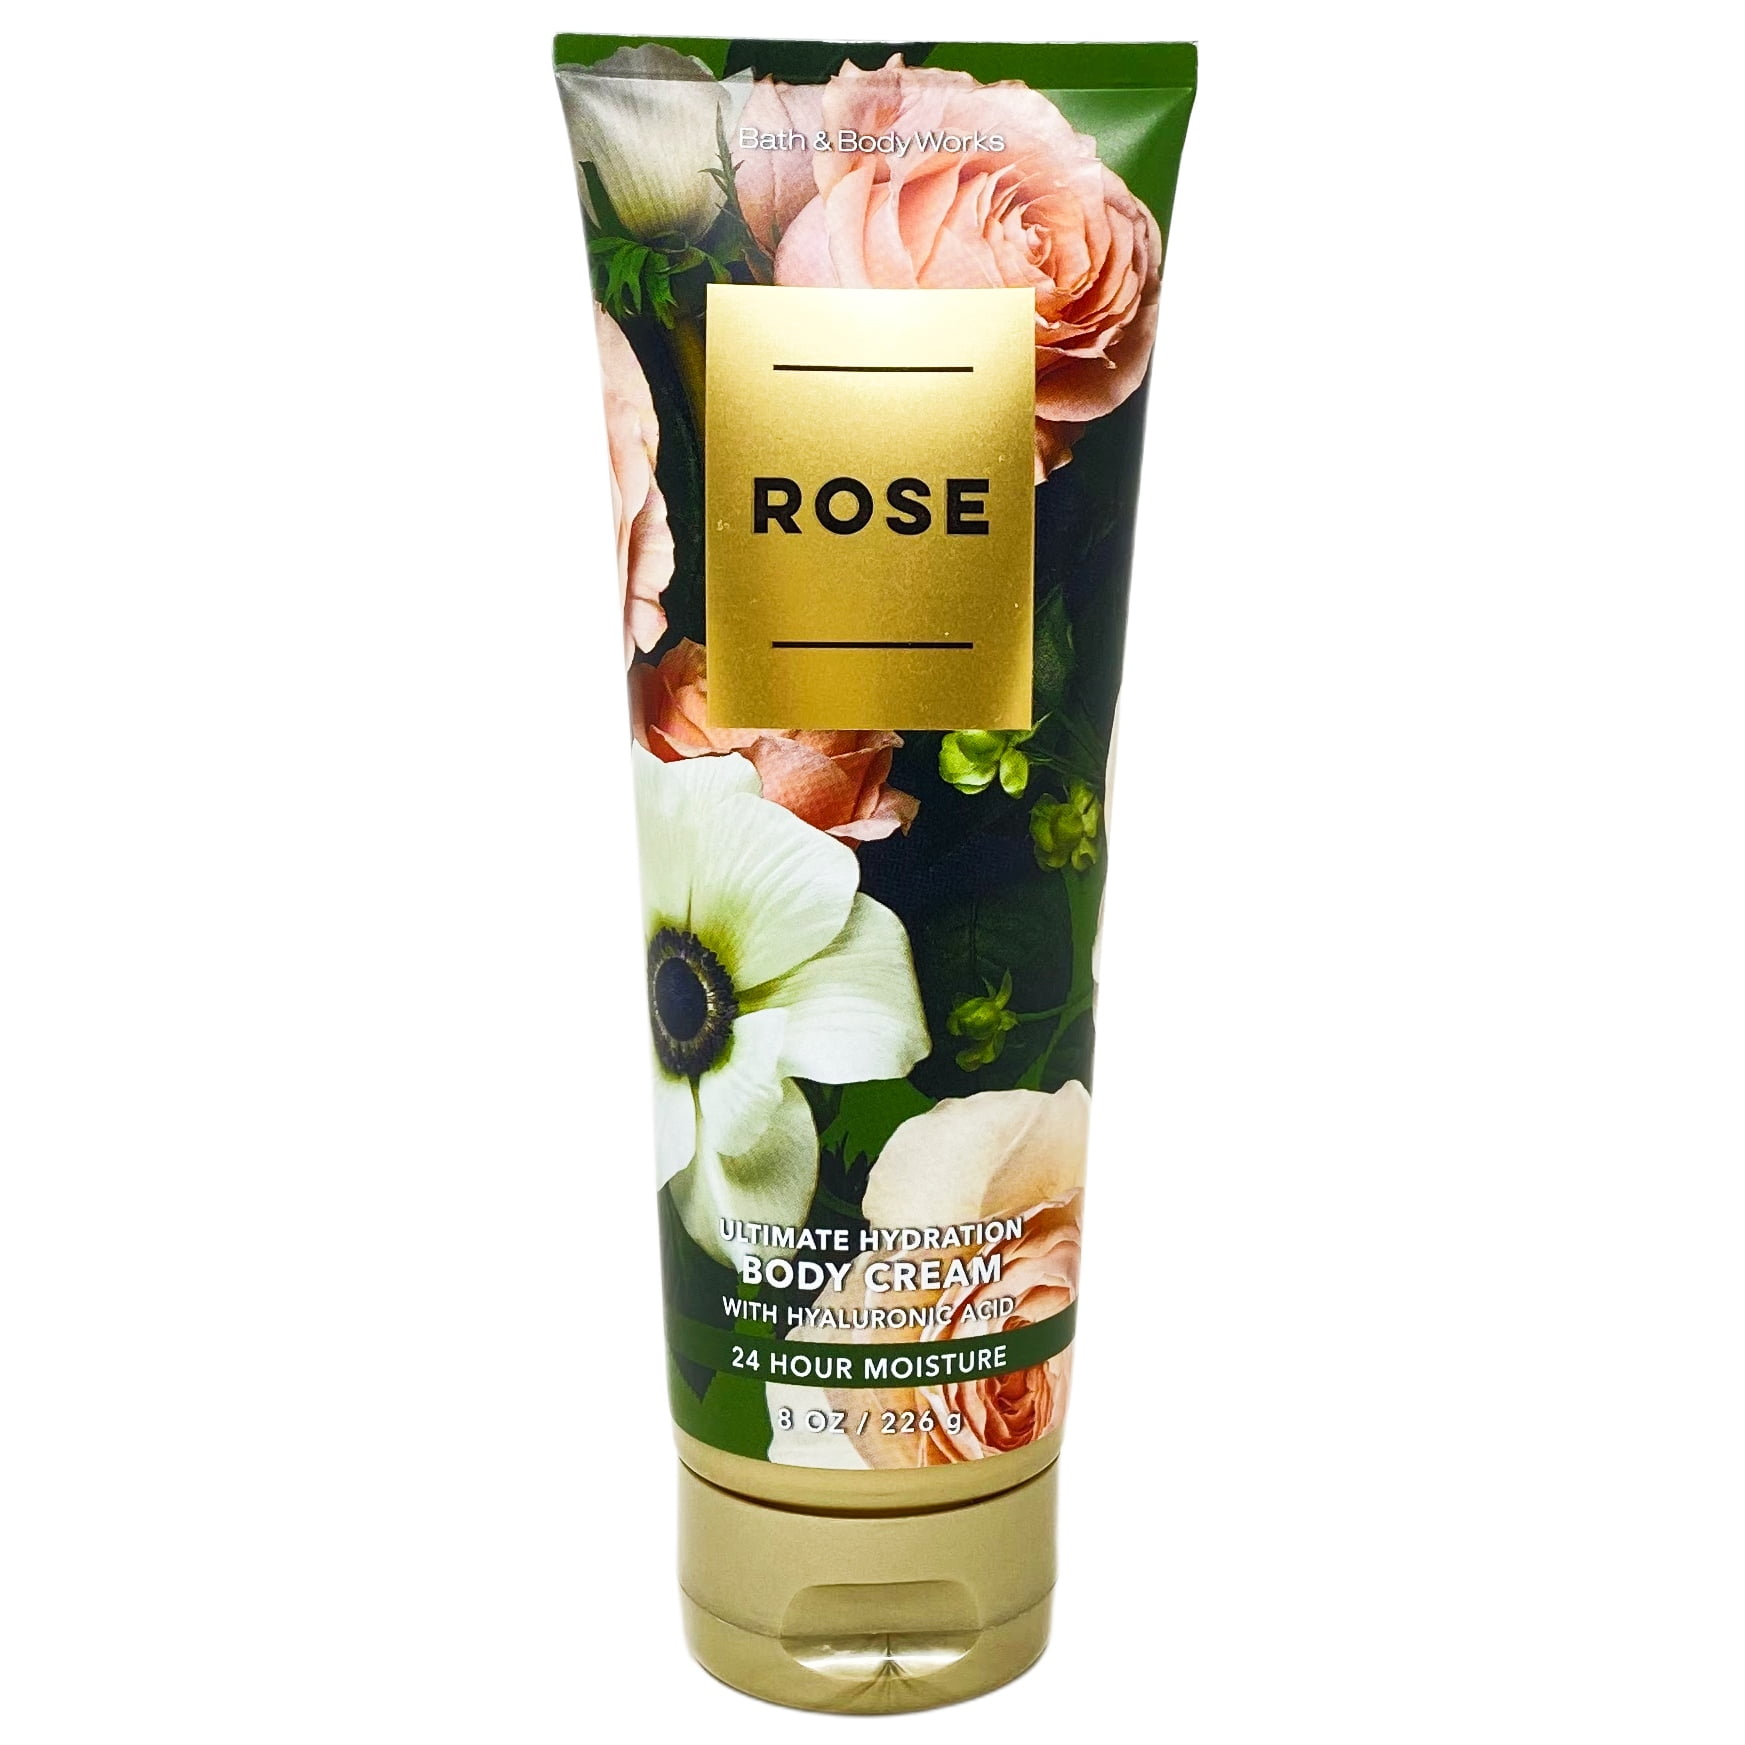 Bath and Body Works Rose 4 Piece Deluxe Gift Set - Includes Fine Fragrance  Mist, Ultimate Hydration Body Cream, Shower Gel, and Body Lotion - Full 